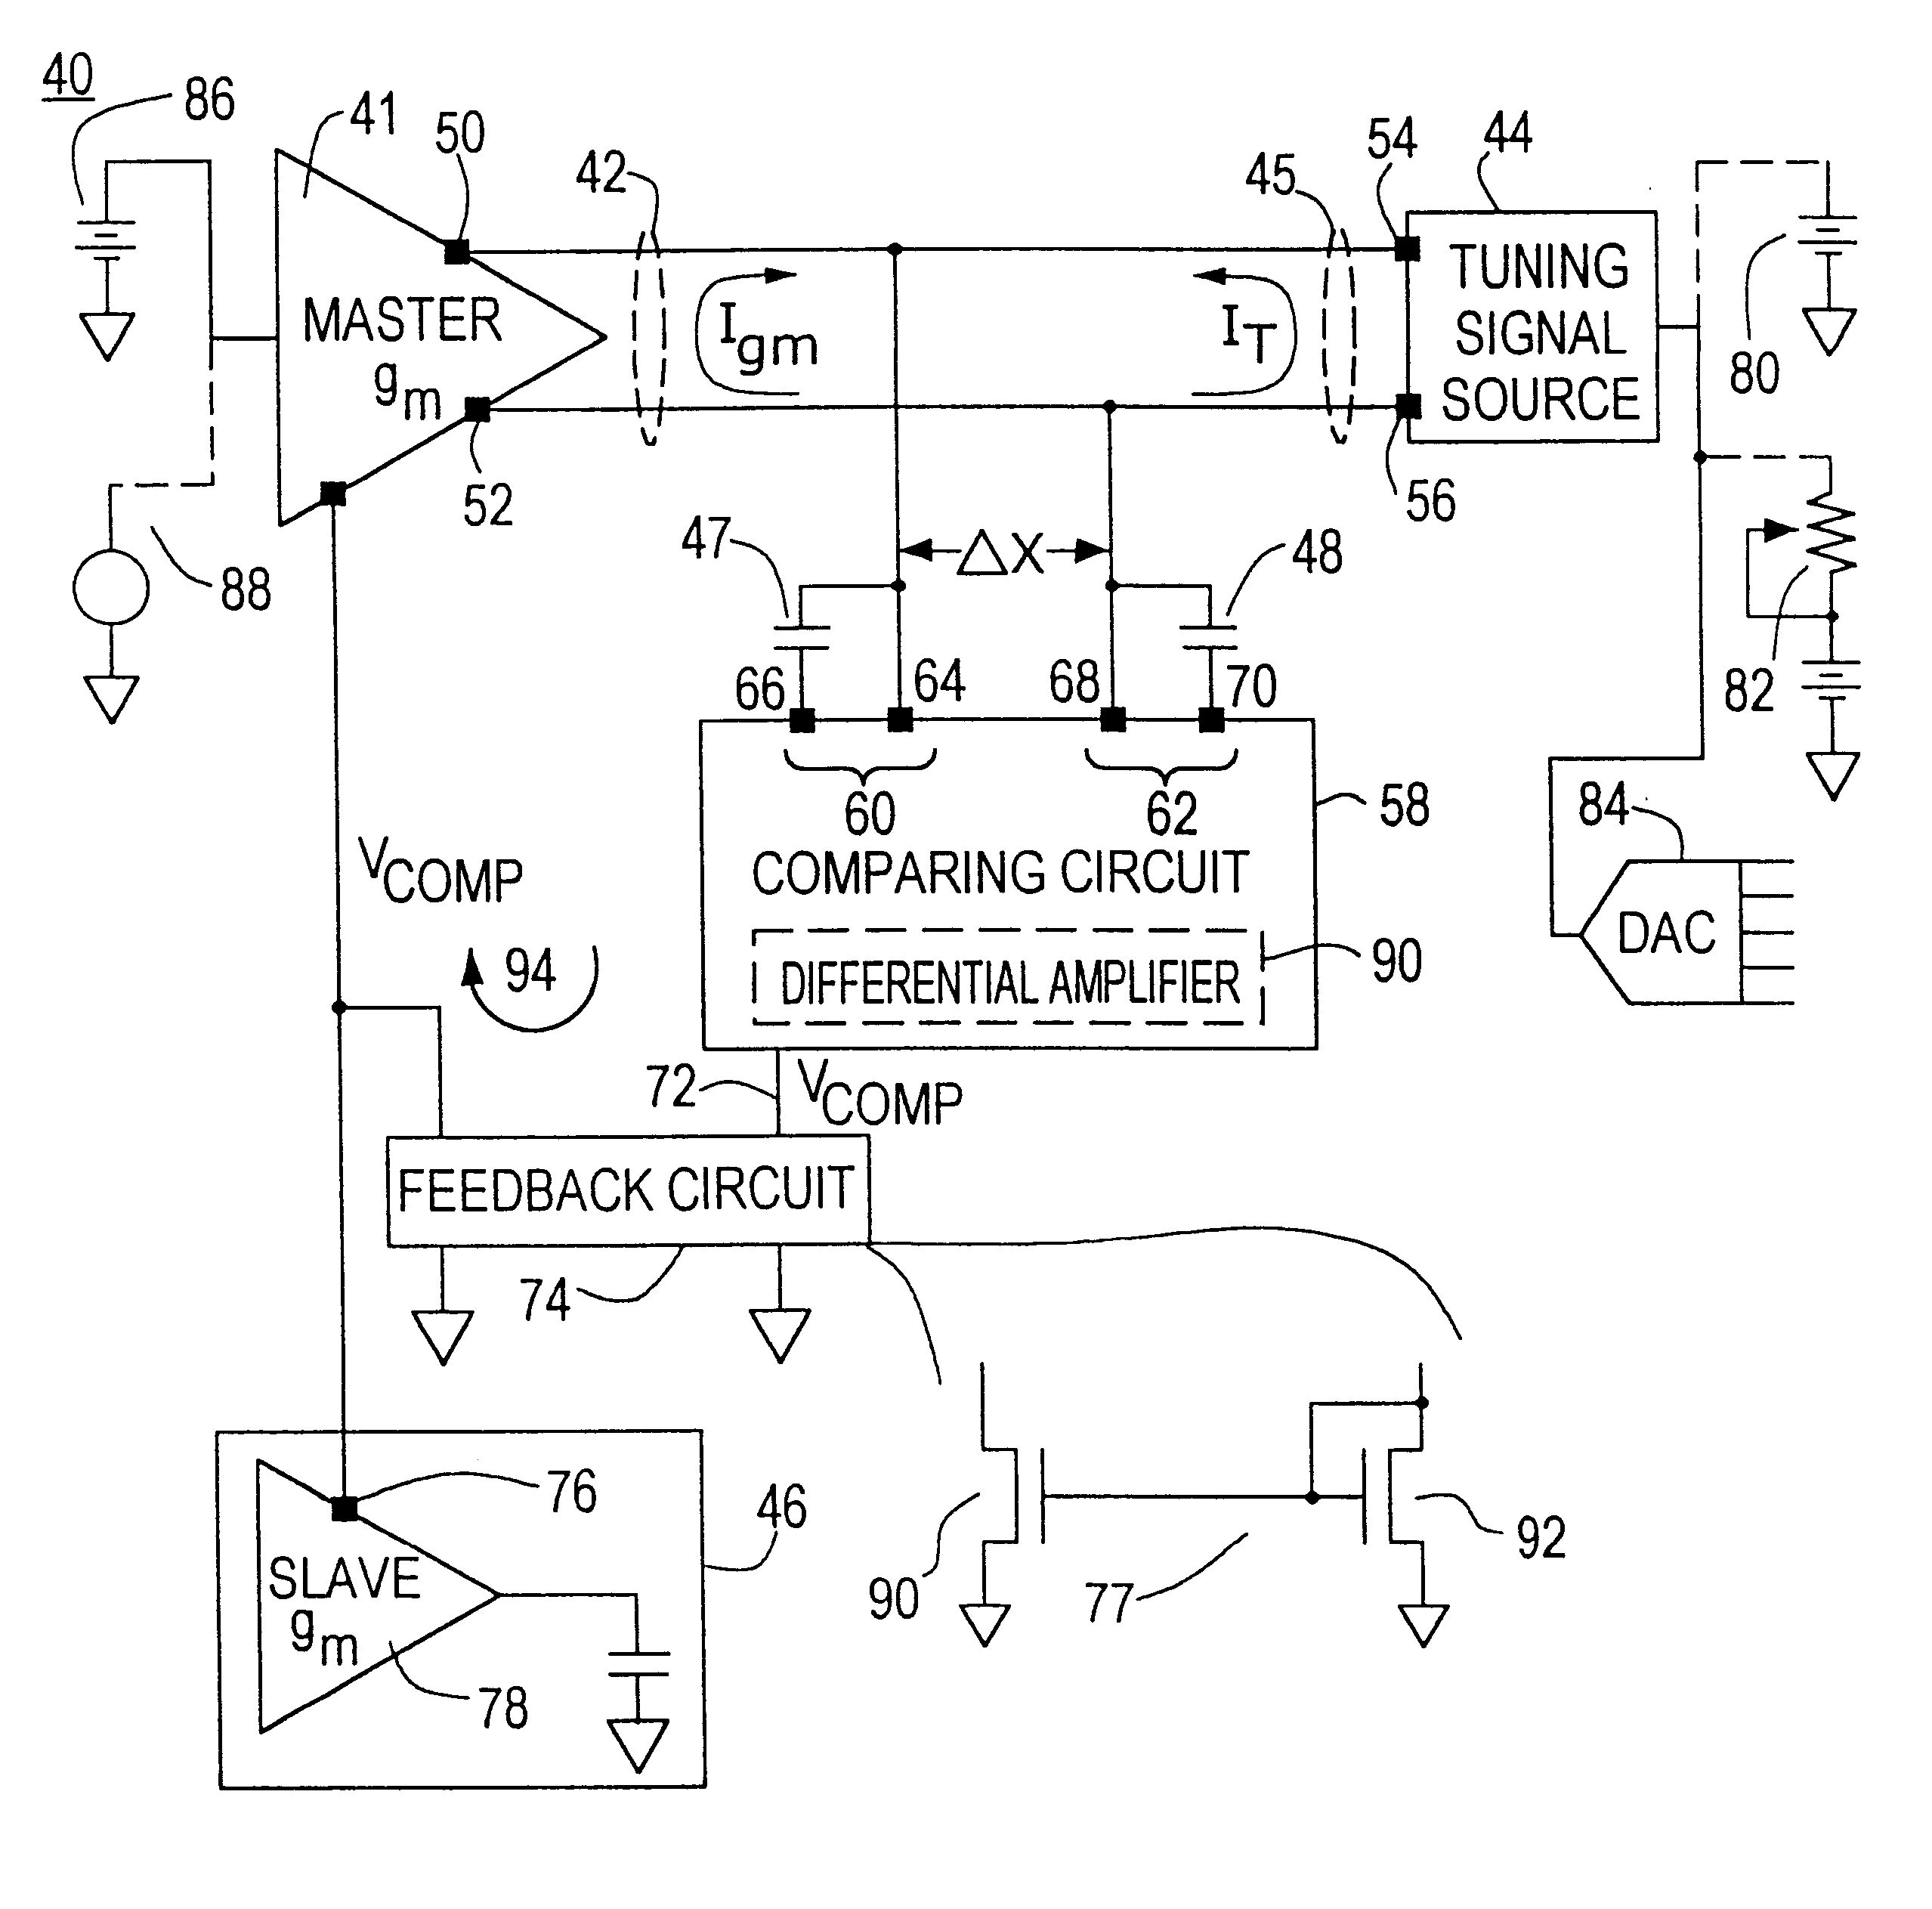 Transconductance filter control system